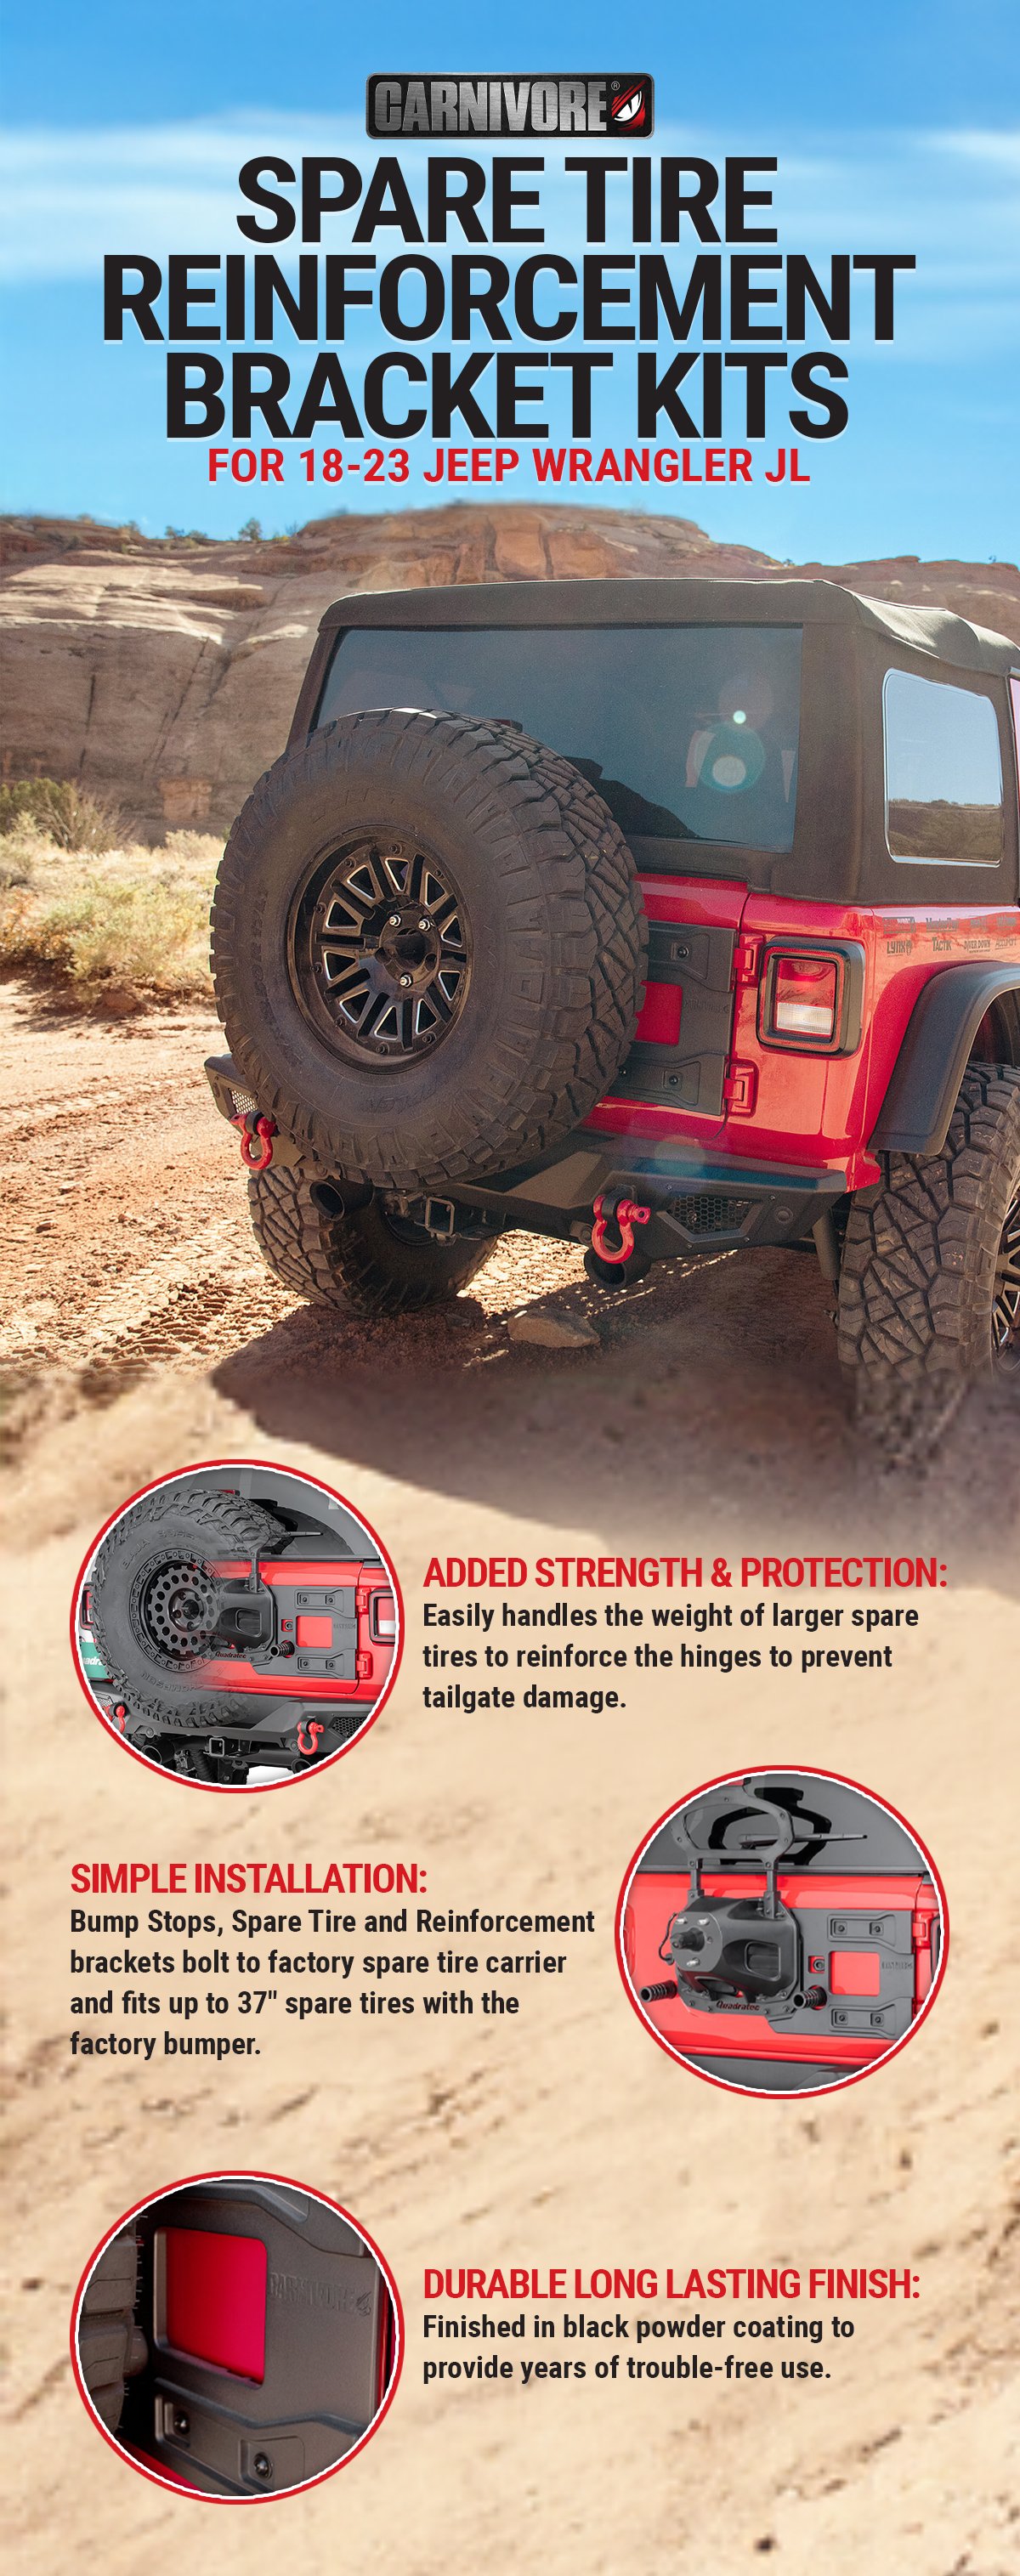 Carnivore spare tire reinforcement bracket kits infographic